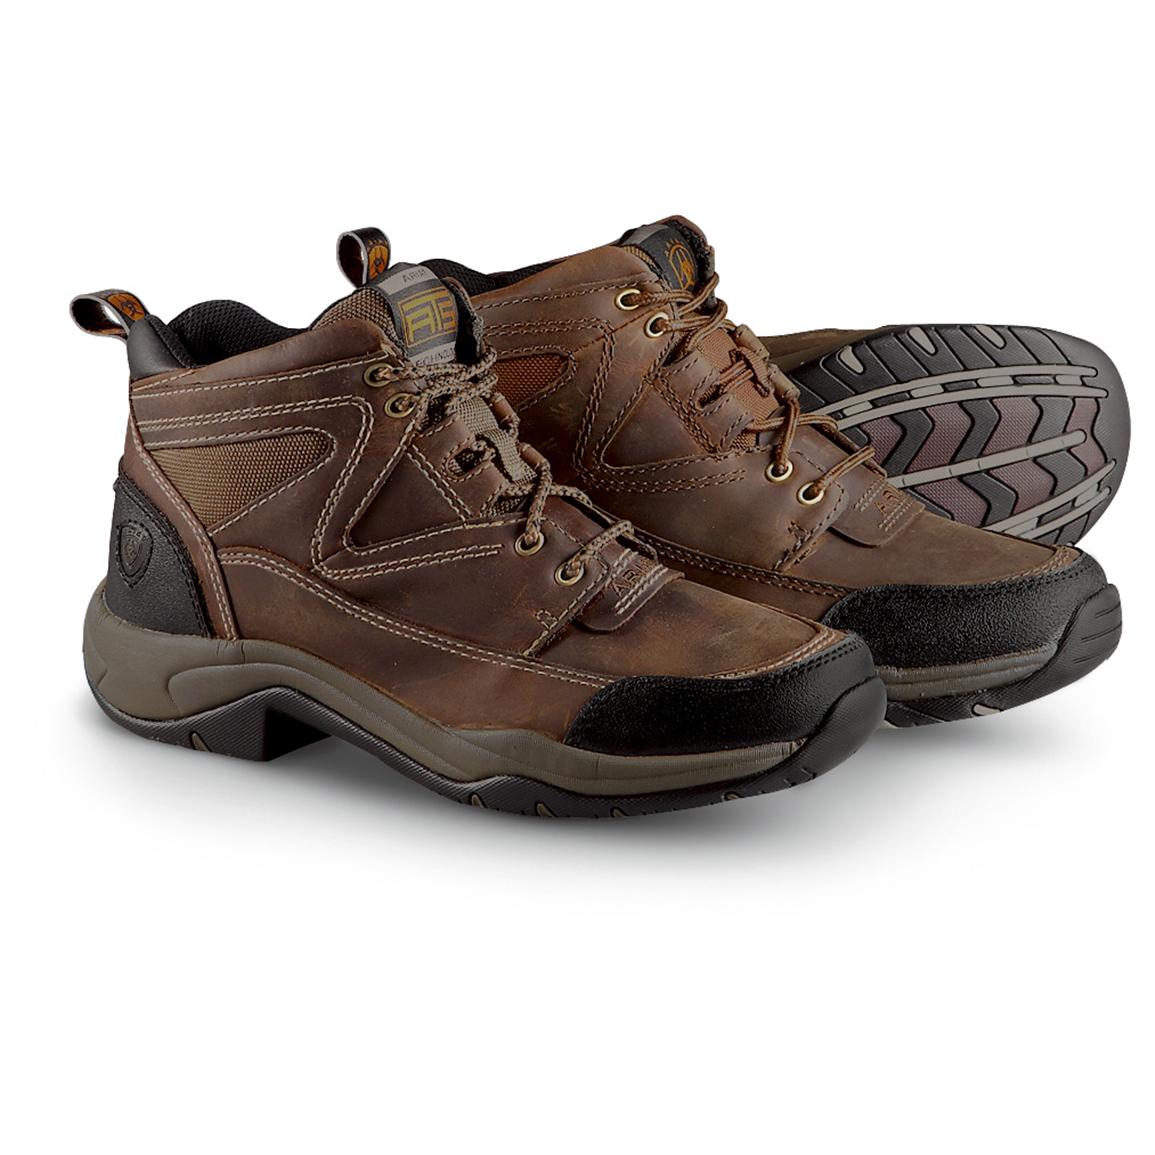 Women's Ariat® Terrain Shoes, Distressed Brown - 282593, Hiking ...